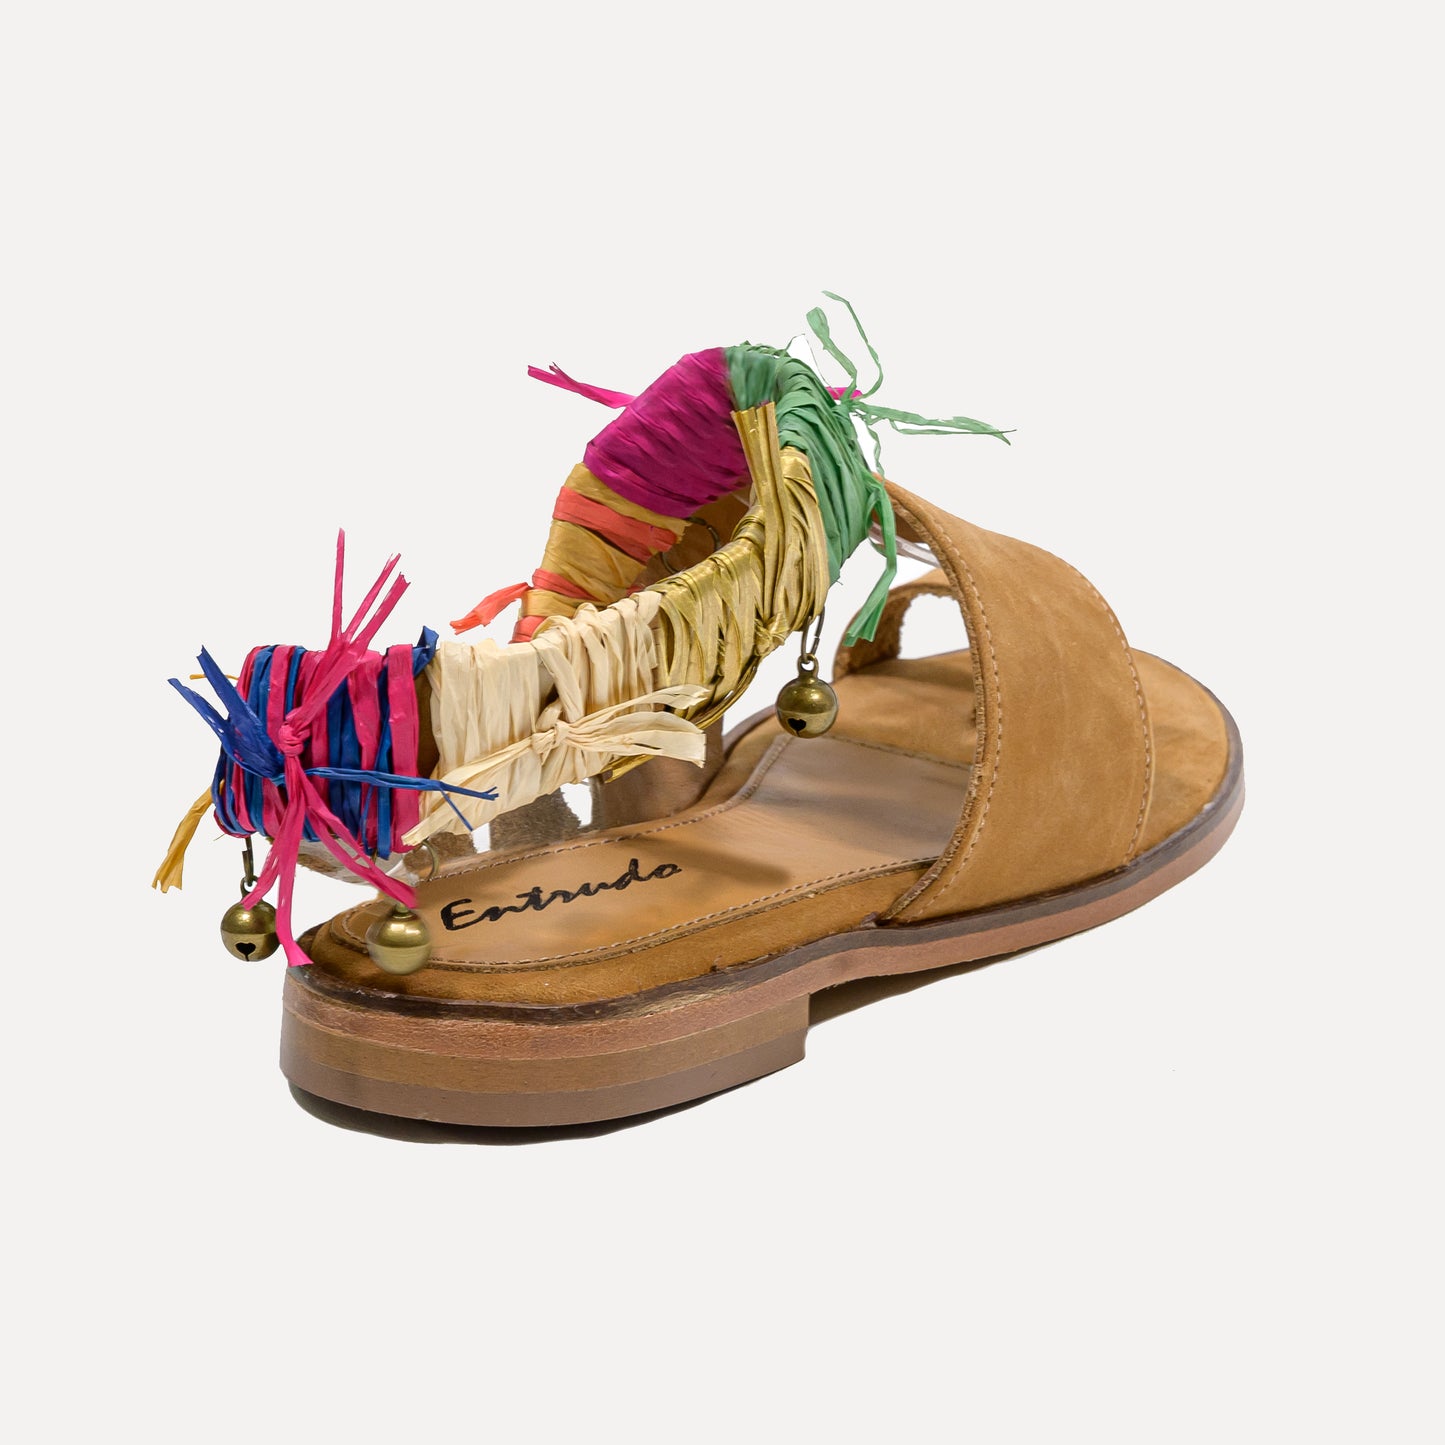 Salsas - sandals with raffia strap with little rattles